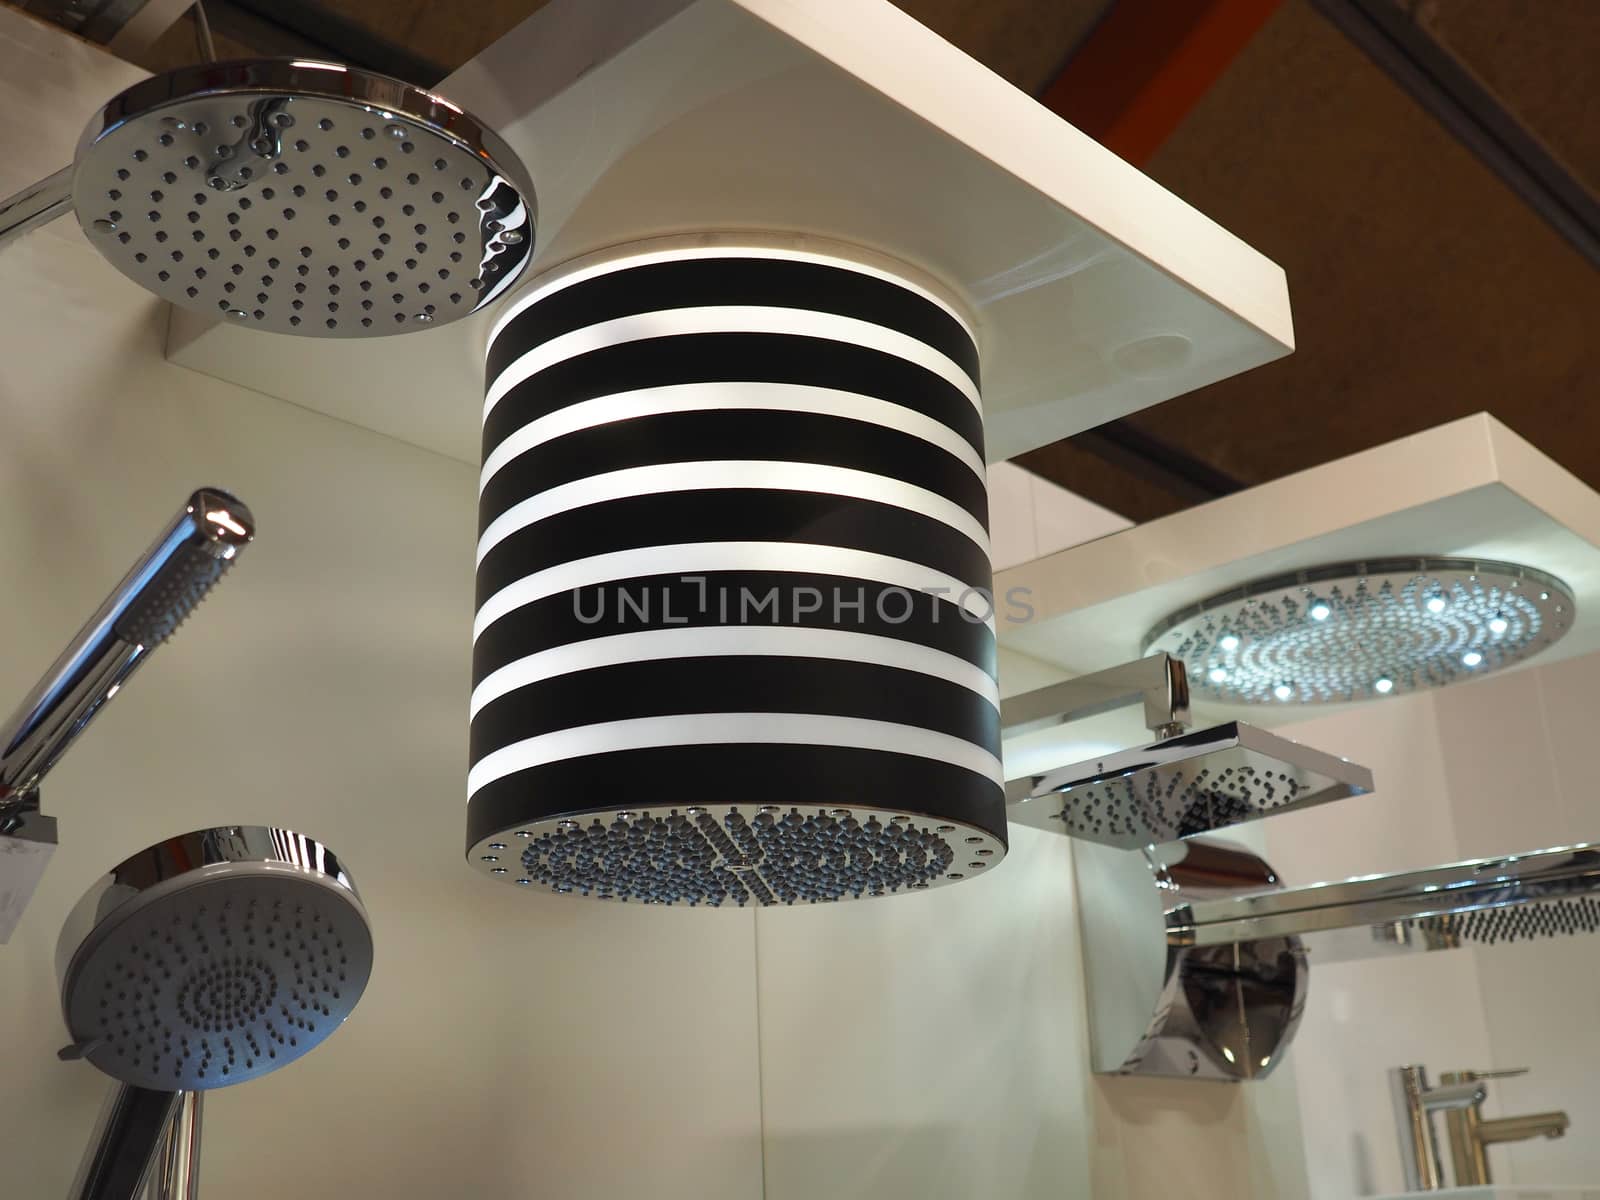 Display of modern shower heads by Ronyzmbow